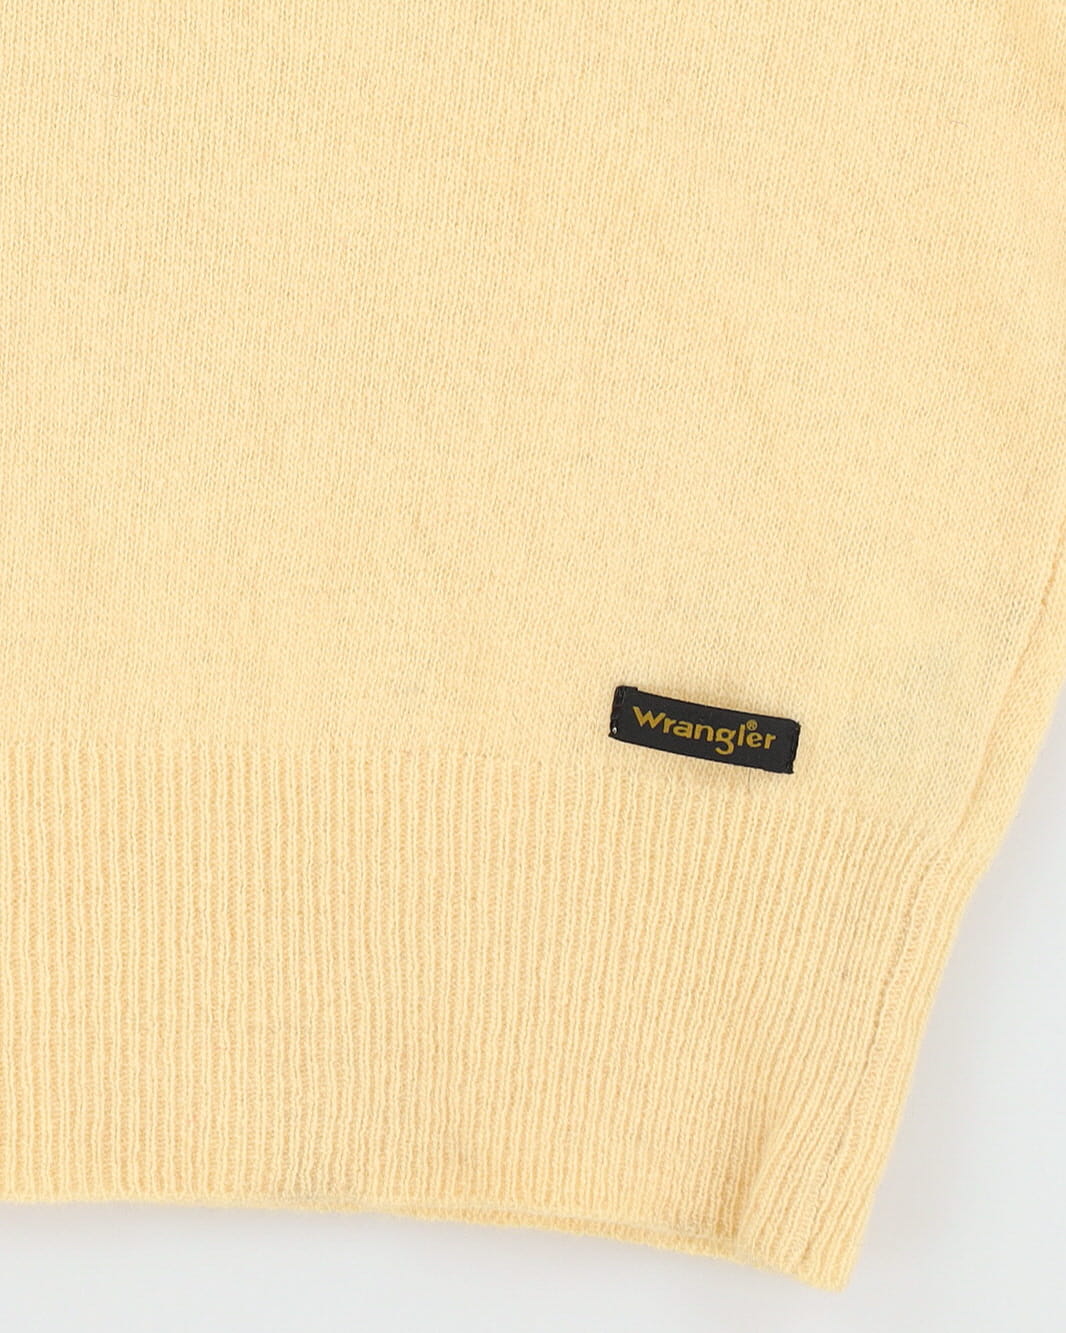 Vintage 70s Deadstock With Tags Wrangler Yellow Sweater Vest / Tank Knit - M